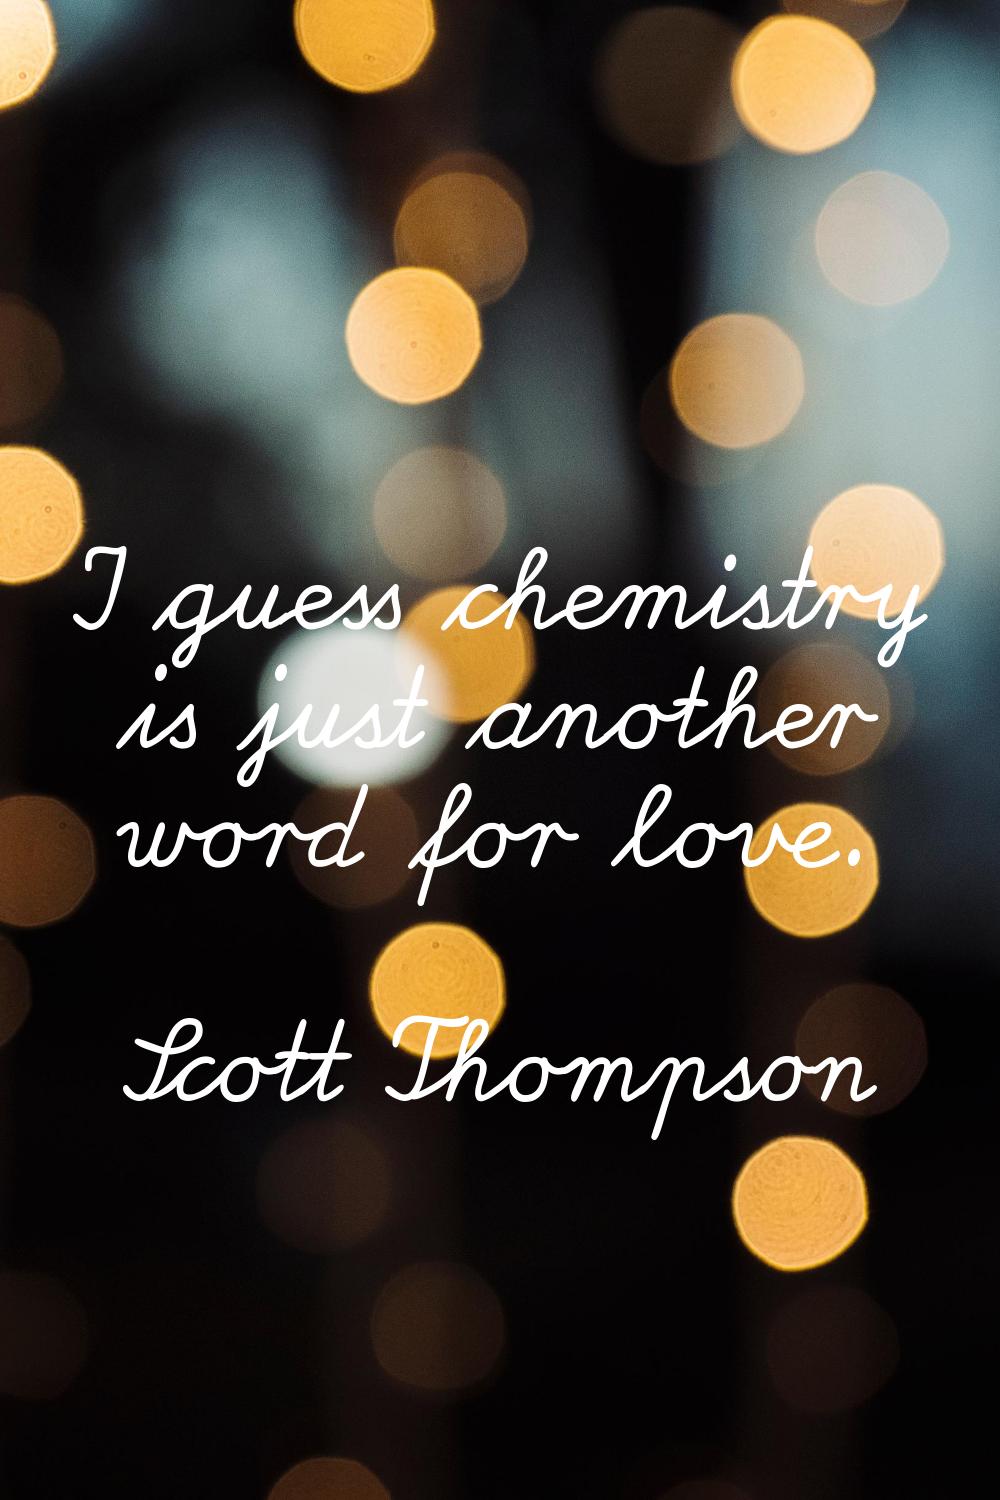 I guess chemistry is just another word for love.